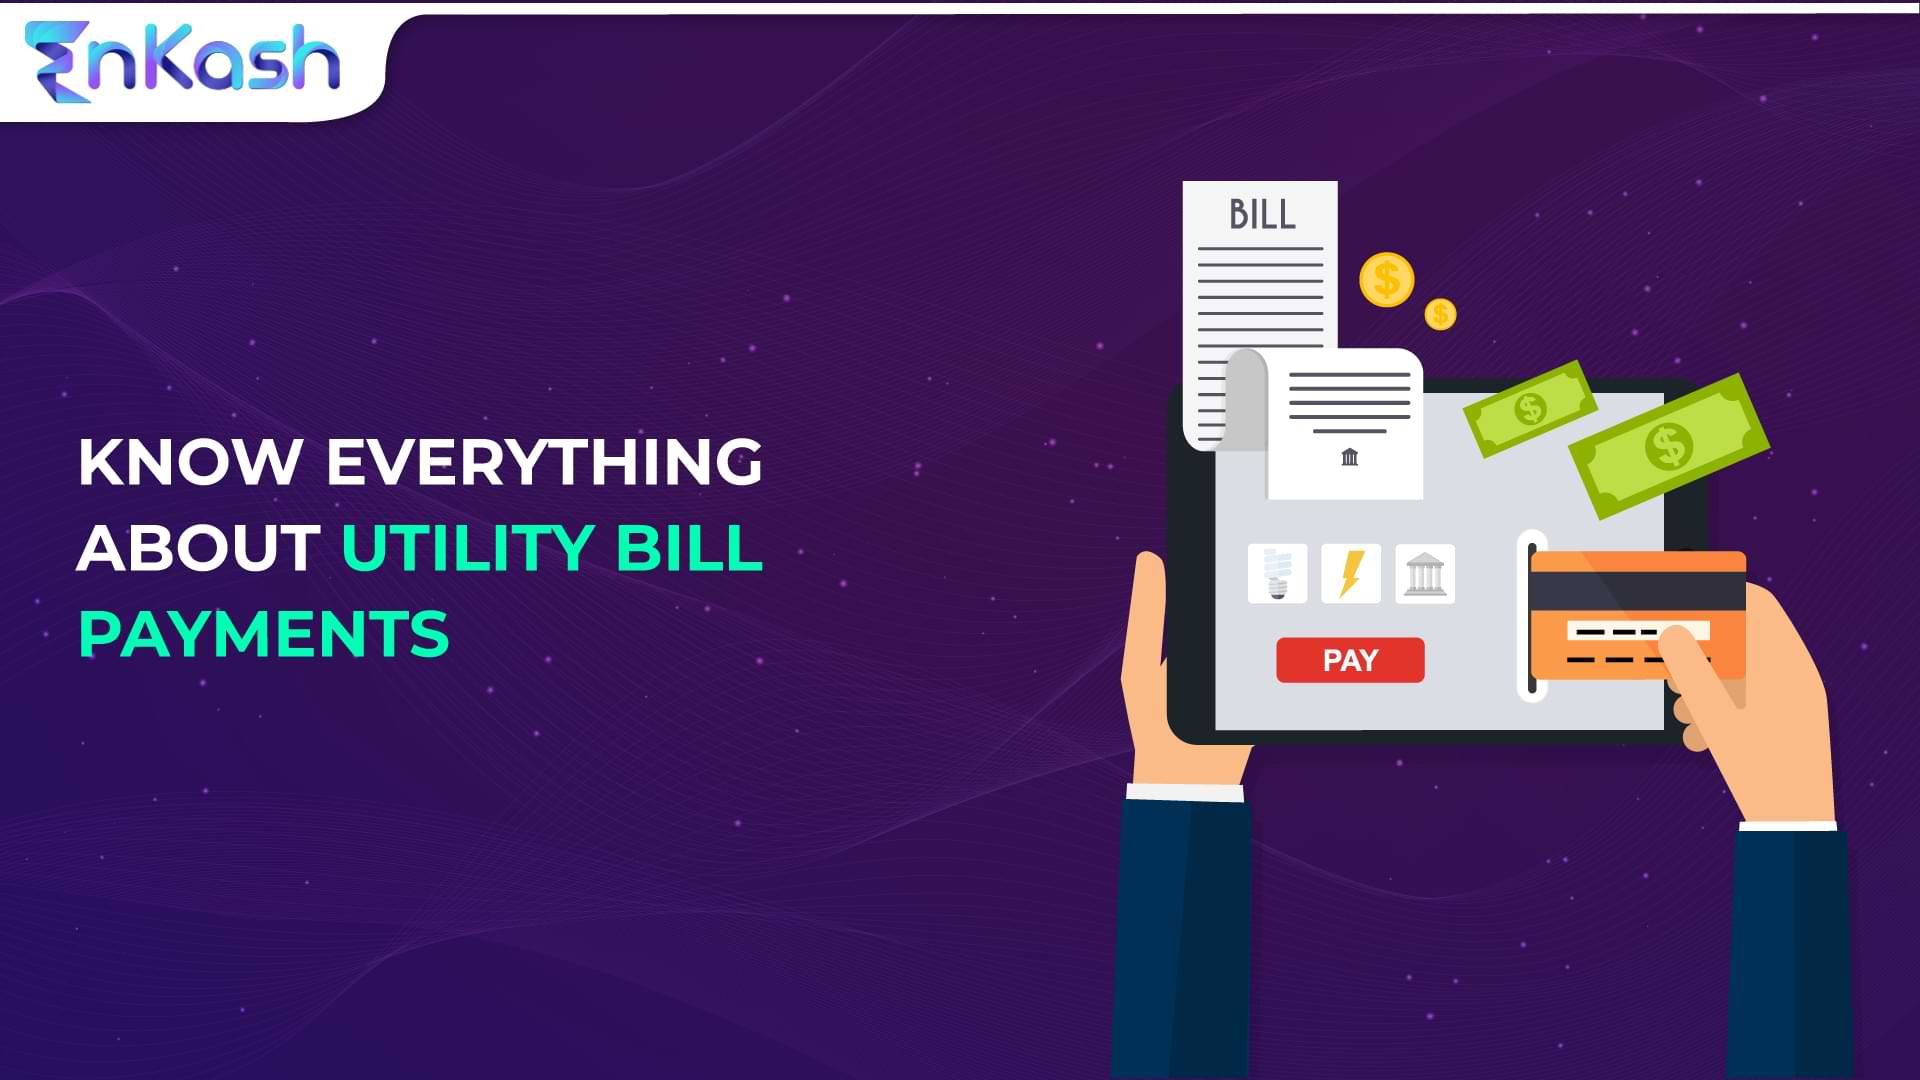 tng utility online bill pay